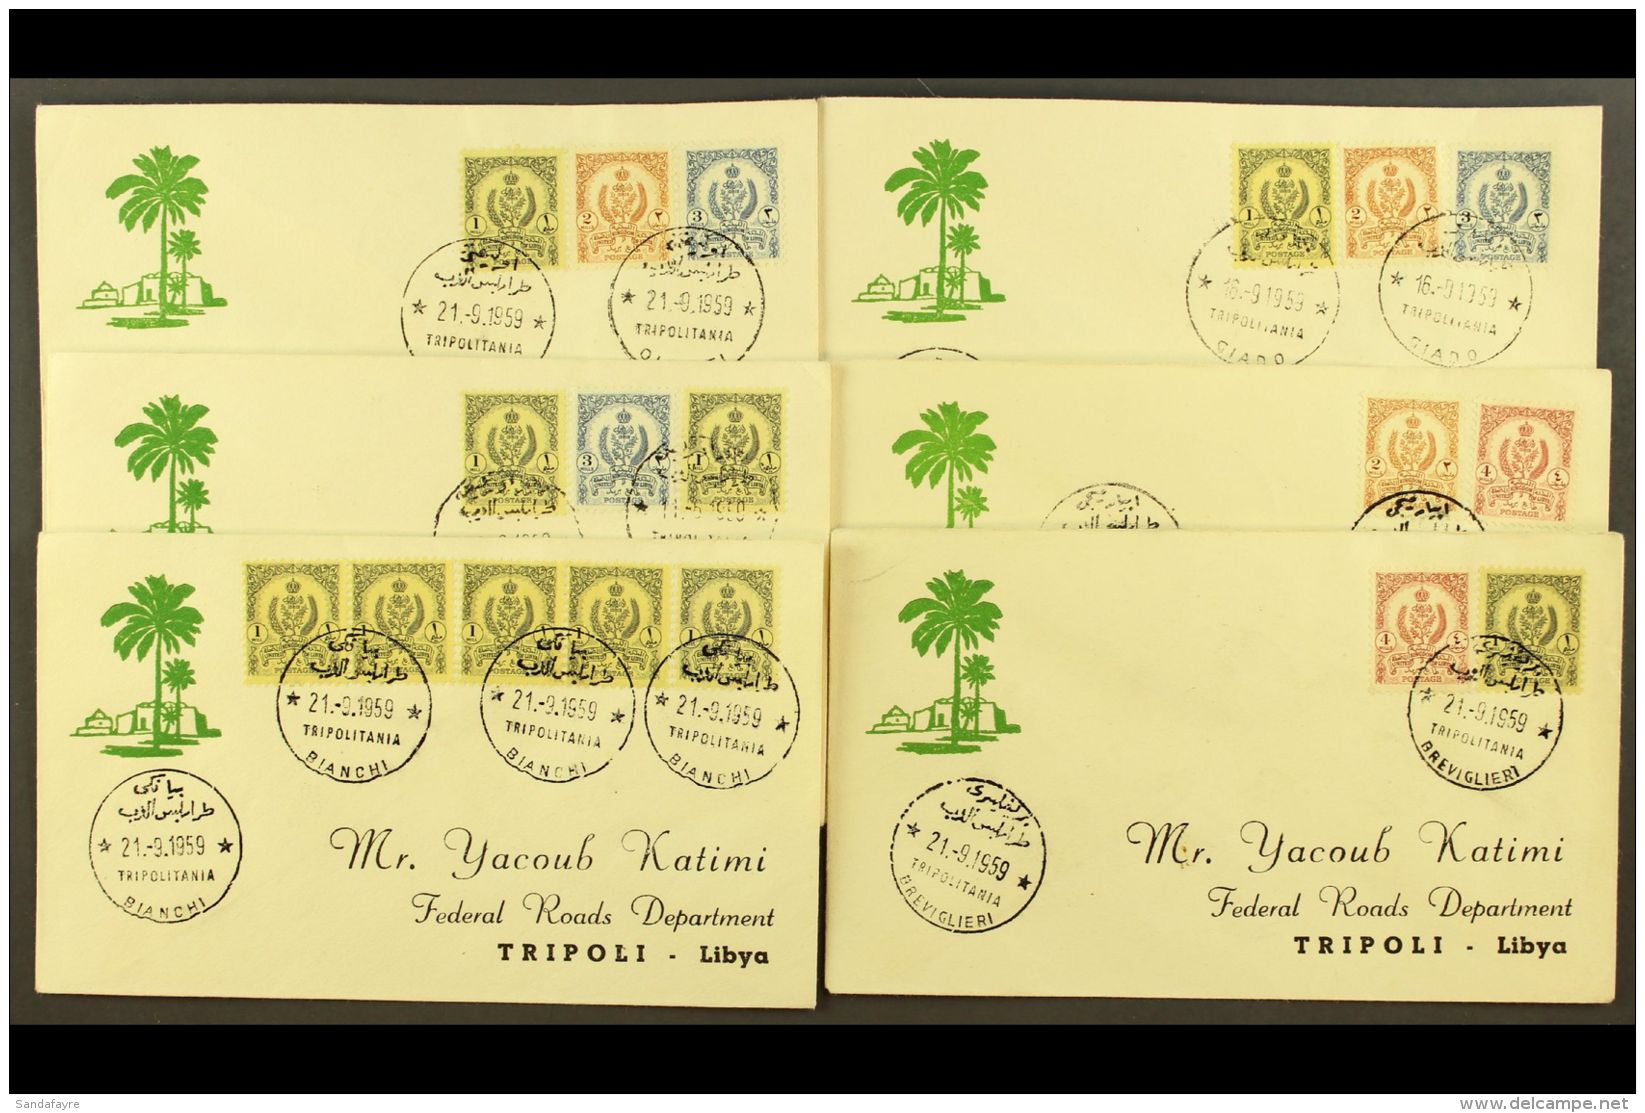 1959 TRIPOLITANIA SUB-OFFICE COVERS. A Pretty Collection Of Matching Covers Bearing Combinations Of Definitive... - Libya